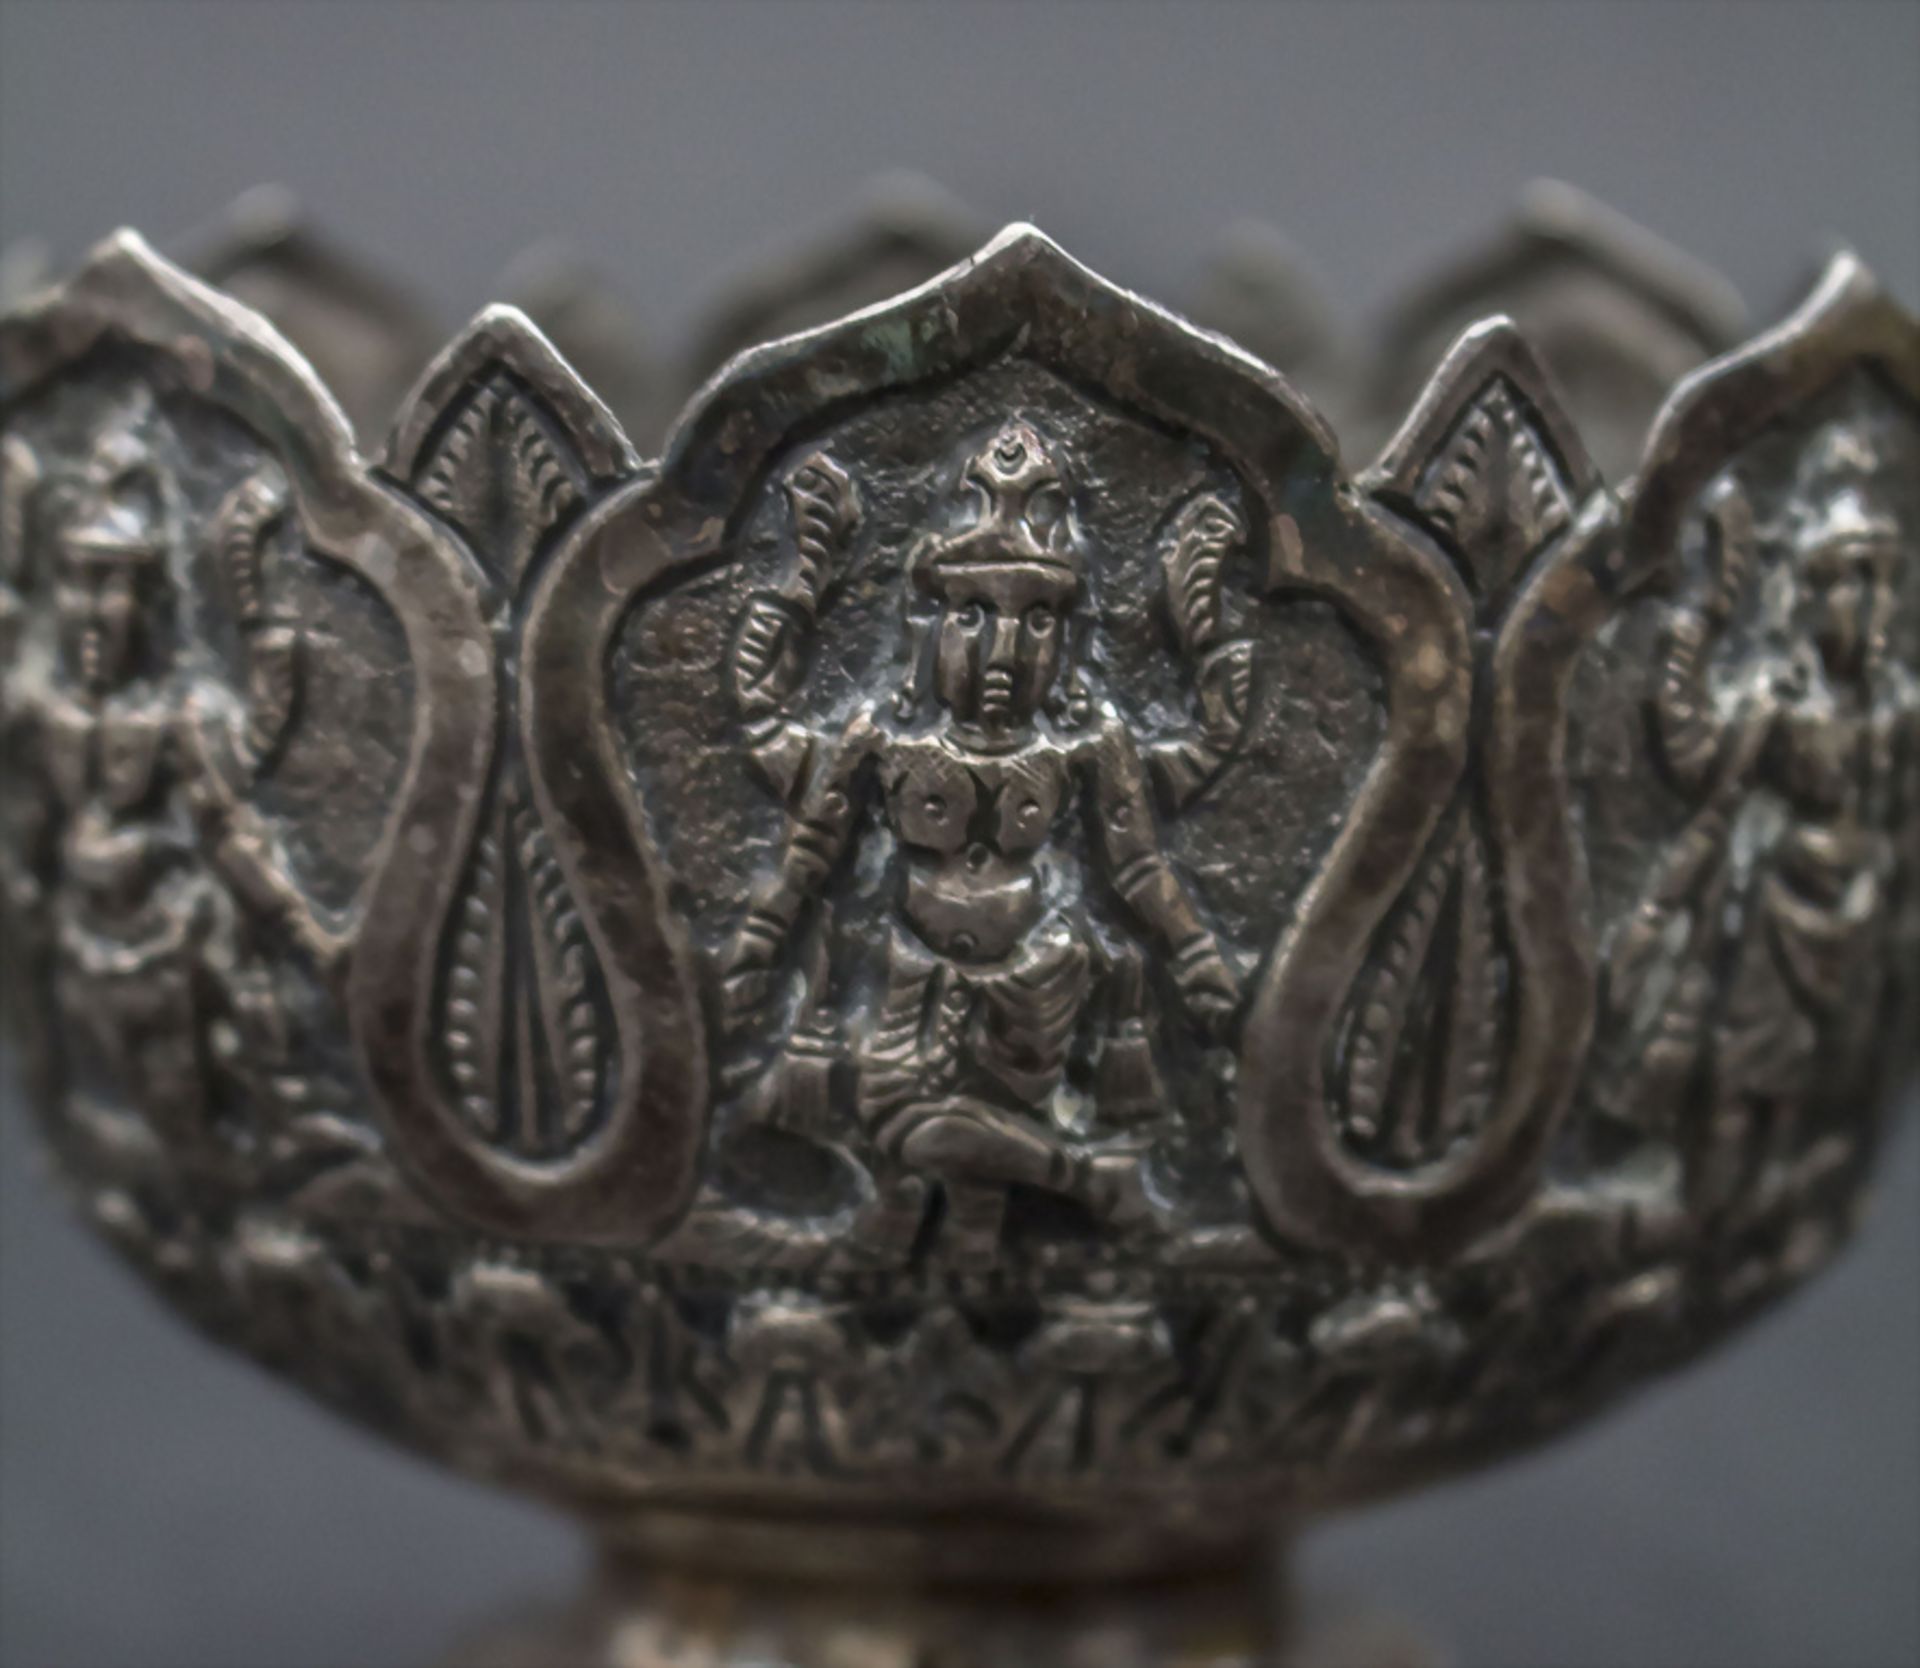 Silber Lotusschale und Becher / A silver lotus bowl and beaker, Thailand - Image 5 of 6